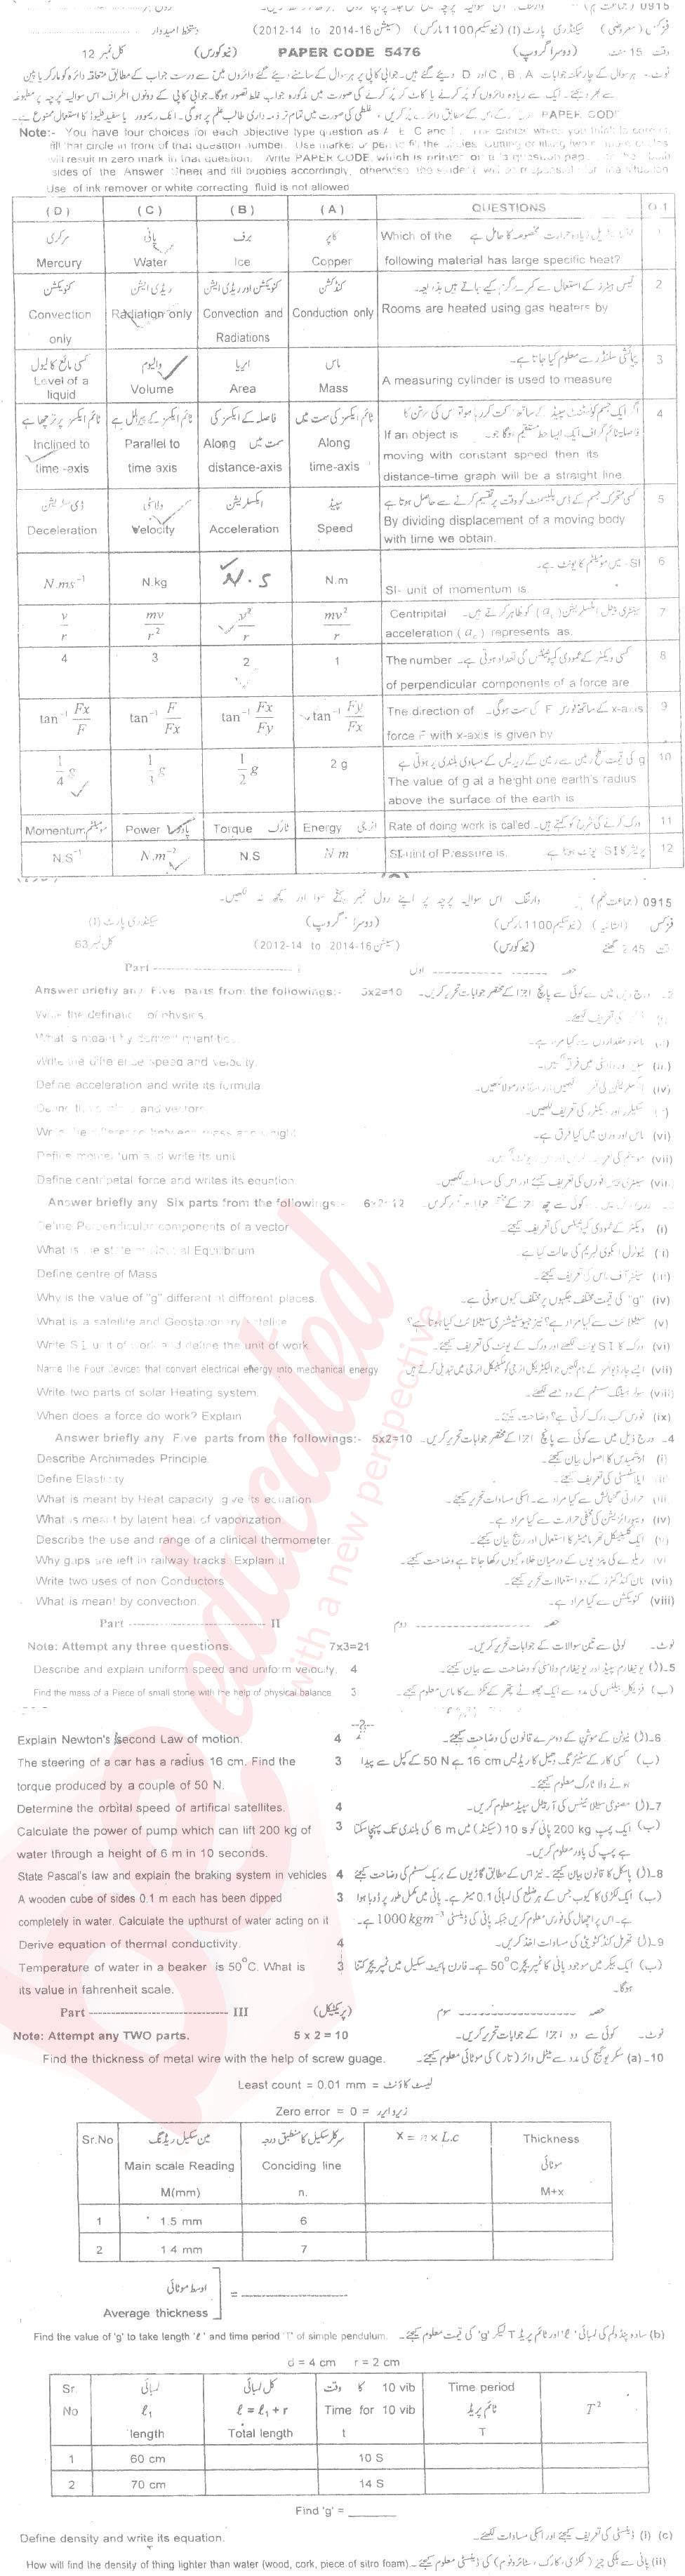 Physics 9th class Past Paper Group 2 BISE Sargodha 2015